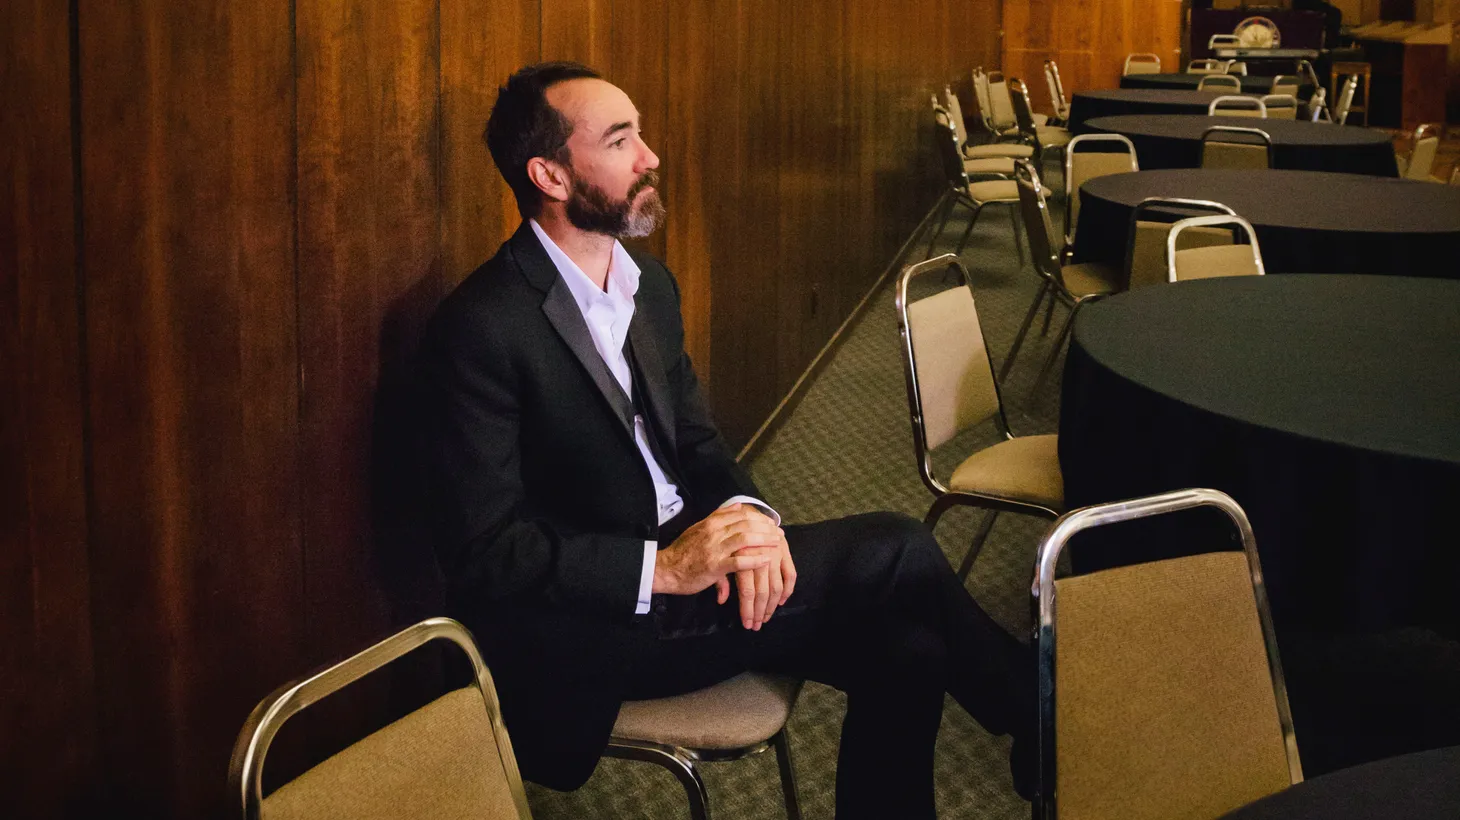 The Shins are back with the group's first new album since 2012's Port Of Morrow.